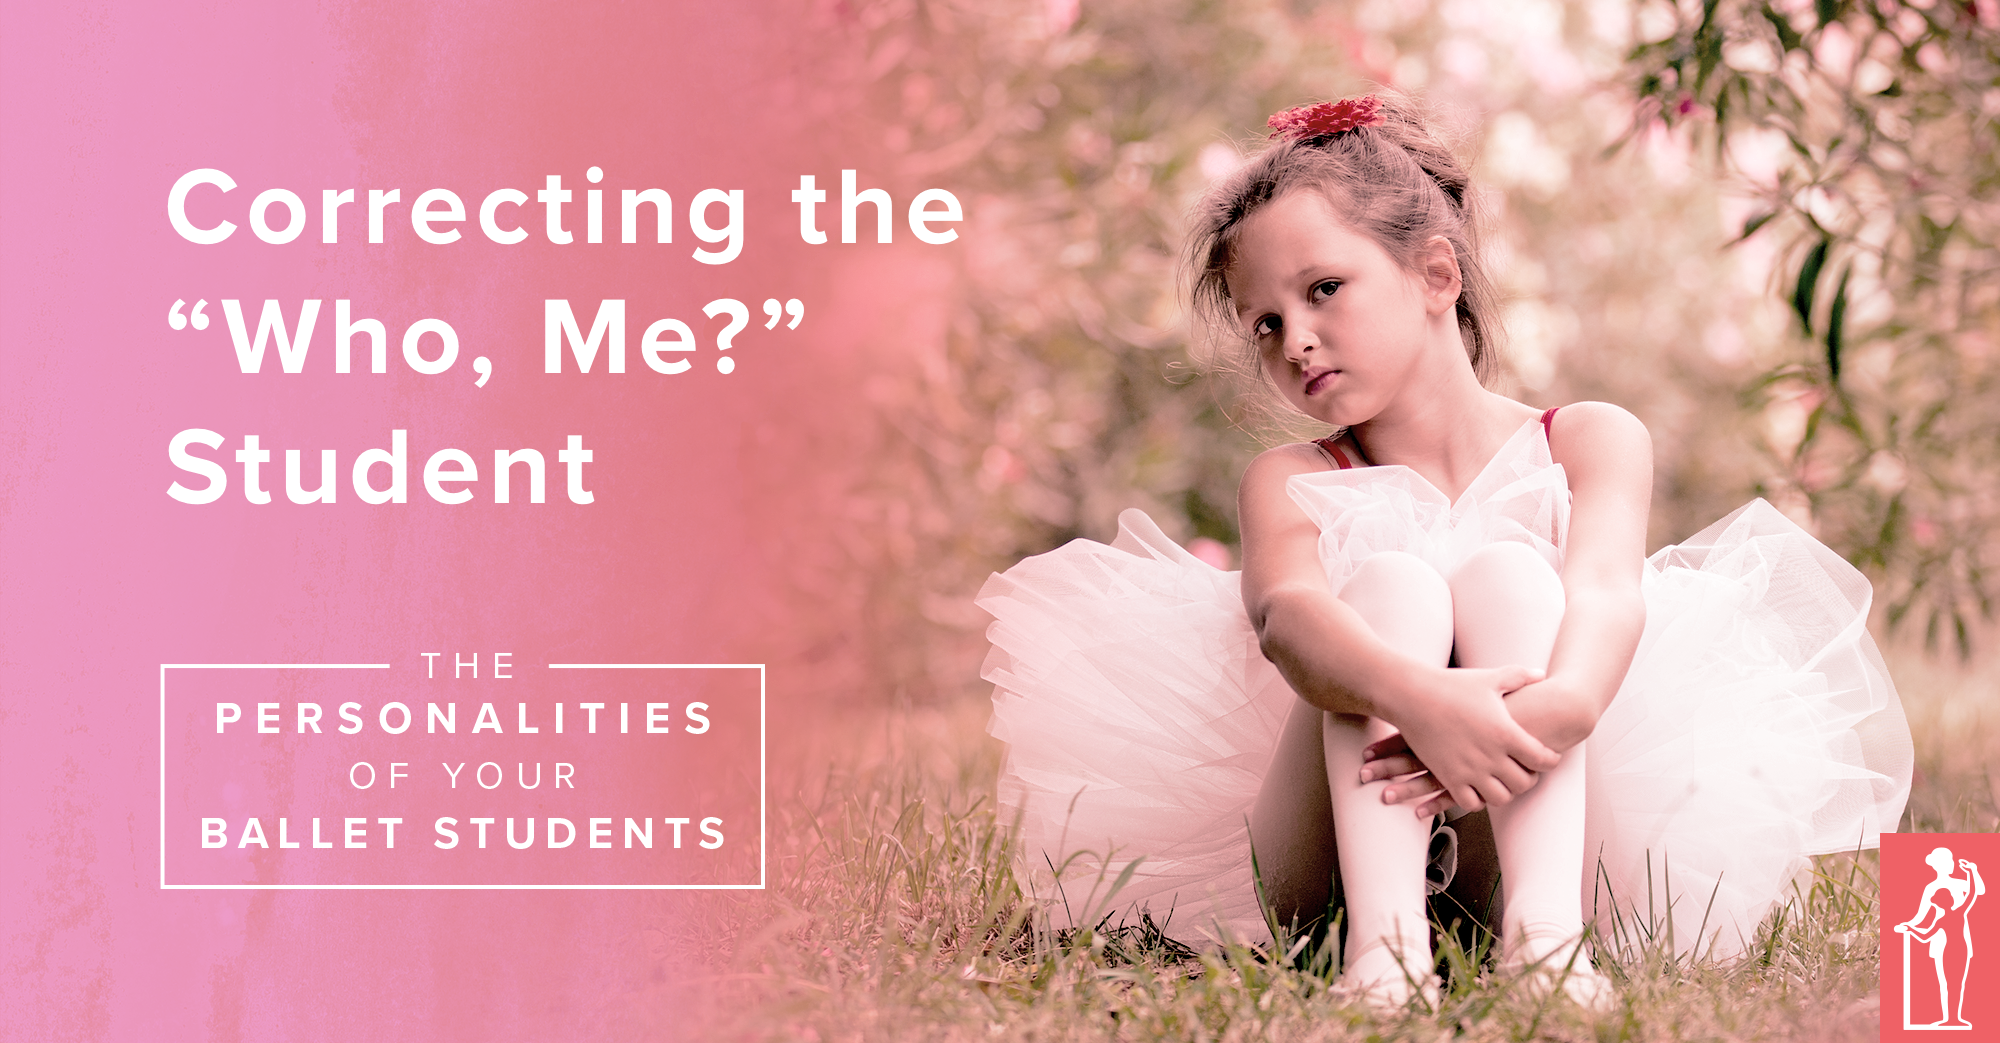 Ballet Student Personalities: "Who, Me?"